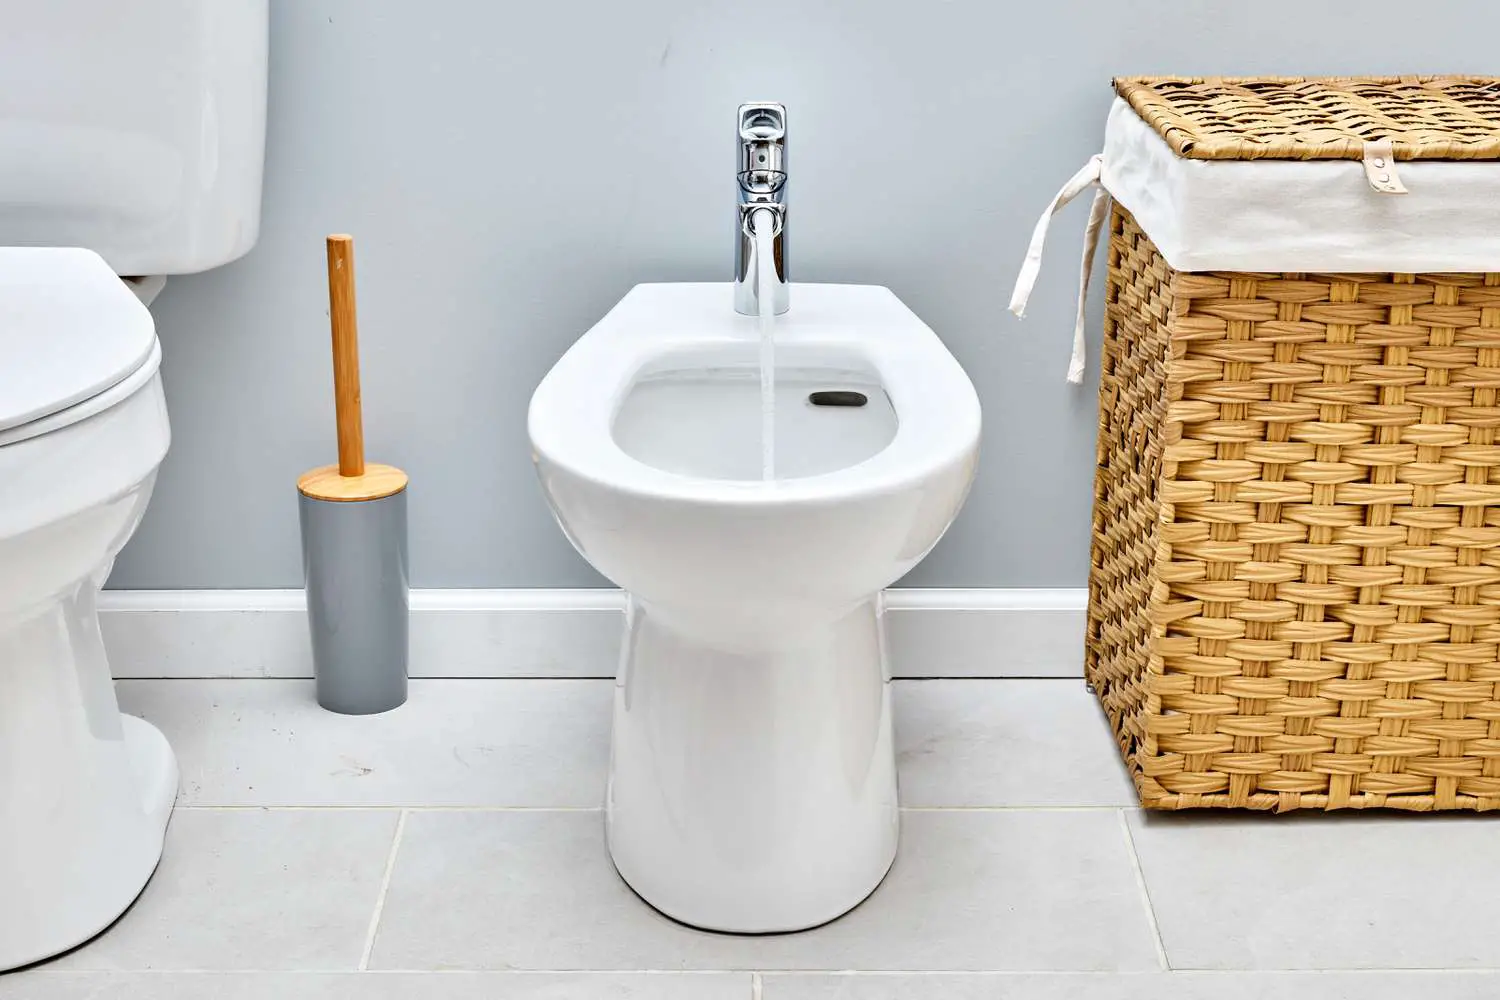 The bidet is a highly underrated bathroom item that few people have heard about before. 